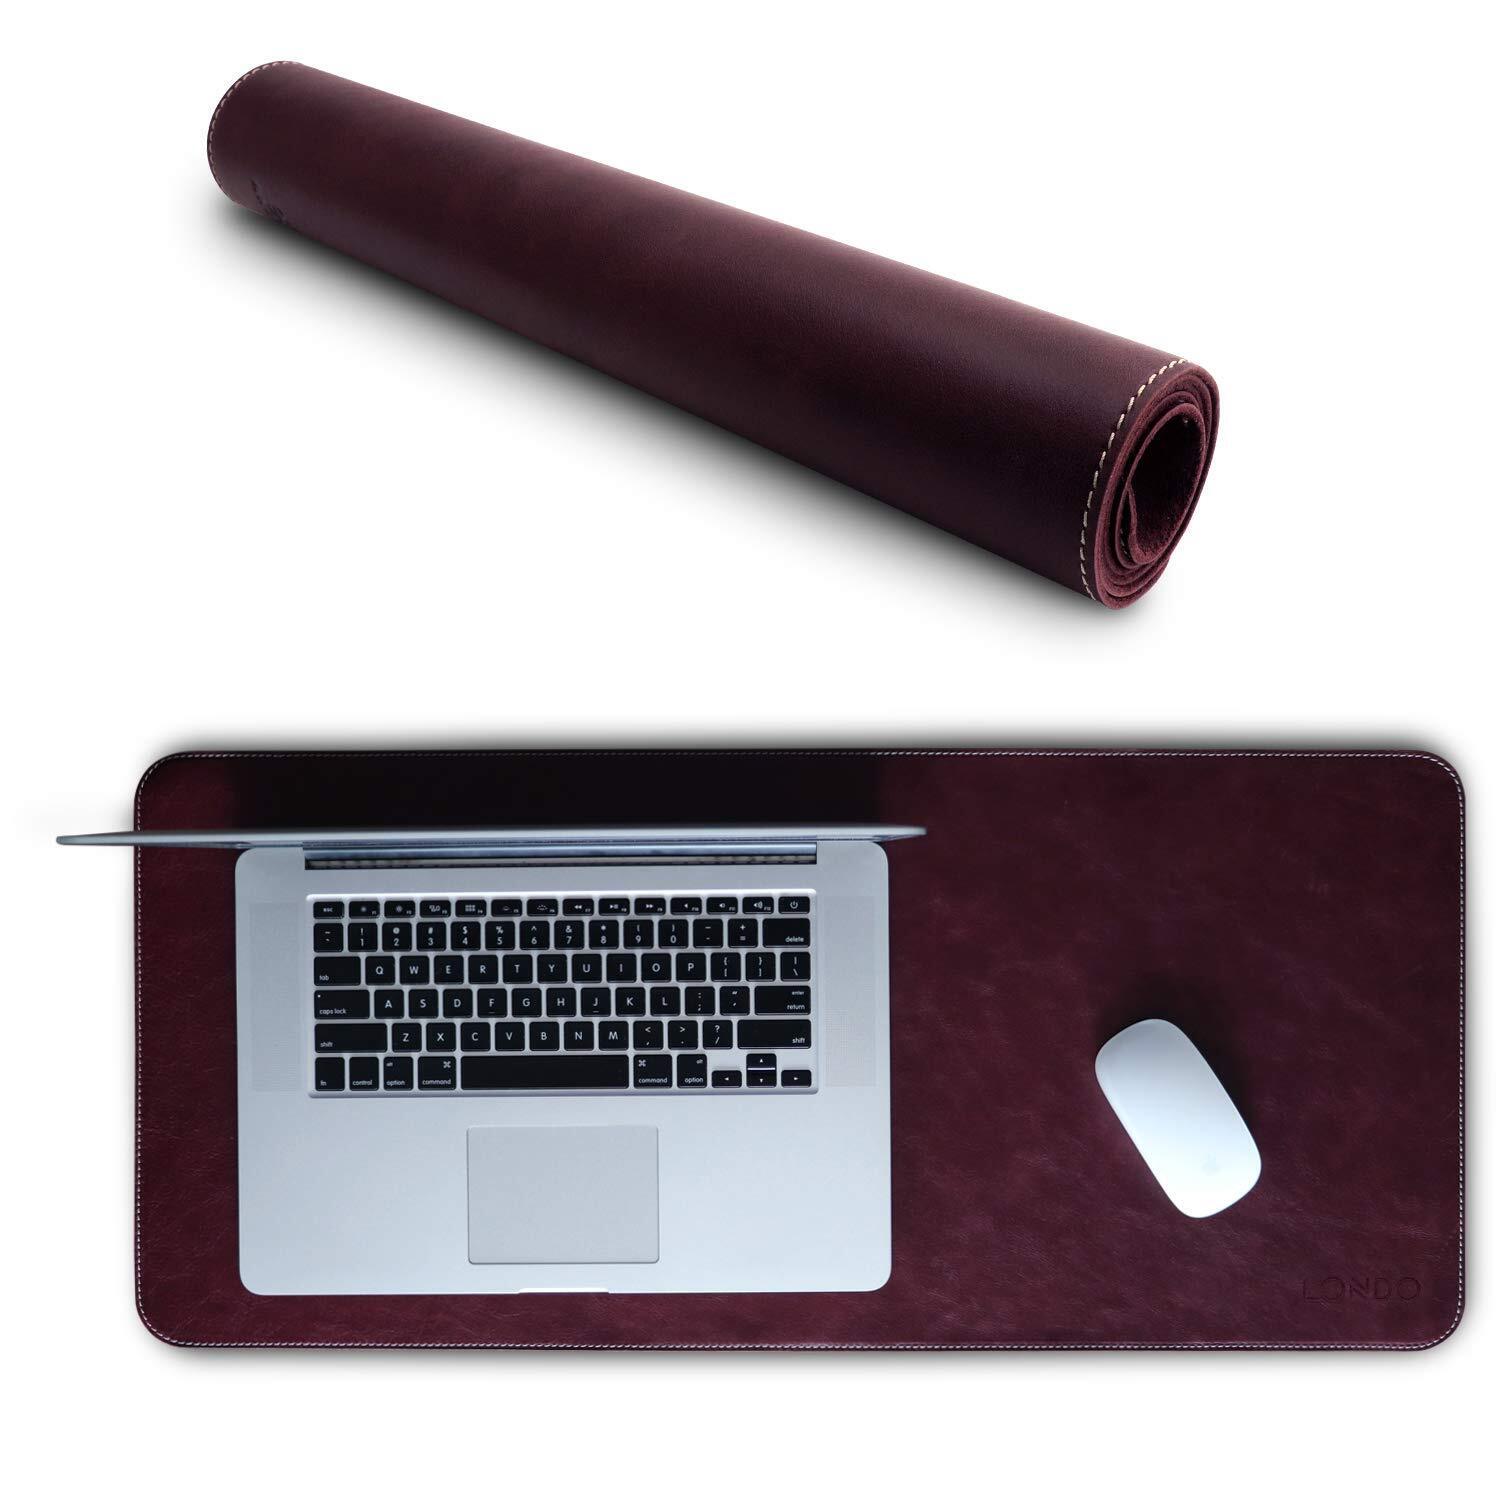 Top Grain Leather Extended Mouse Pad - Desk Mat